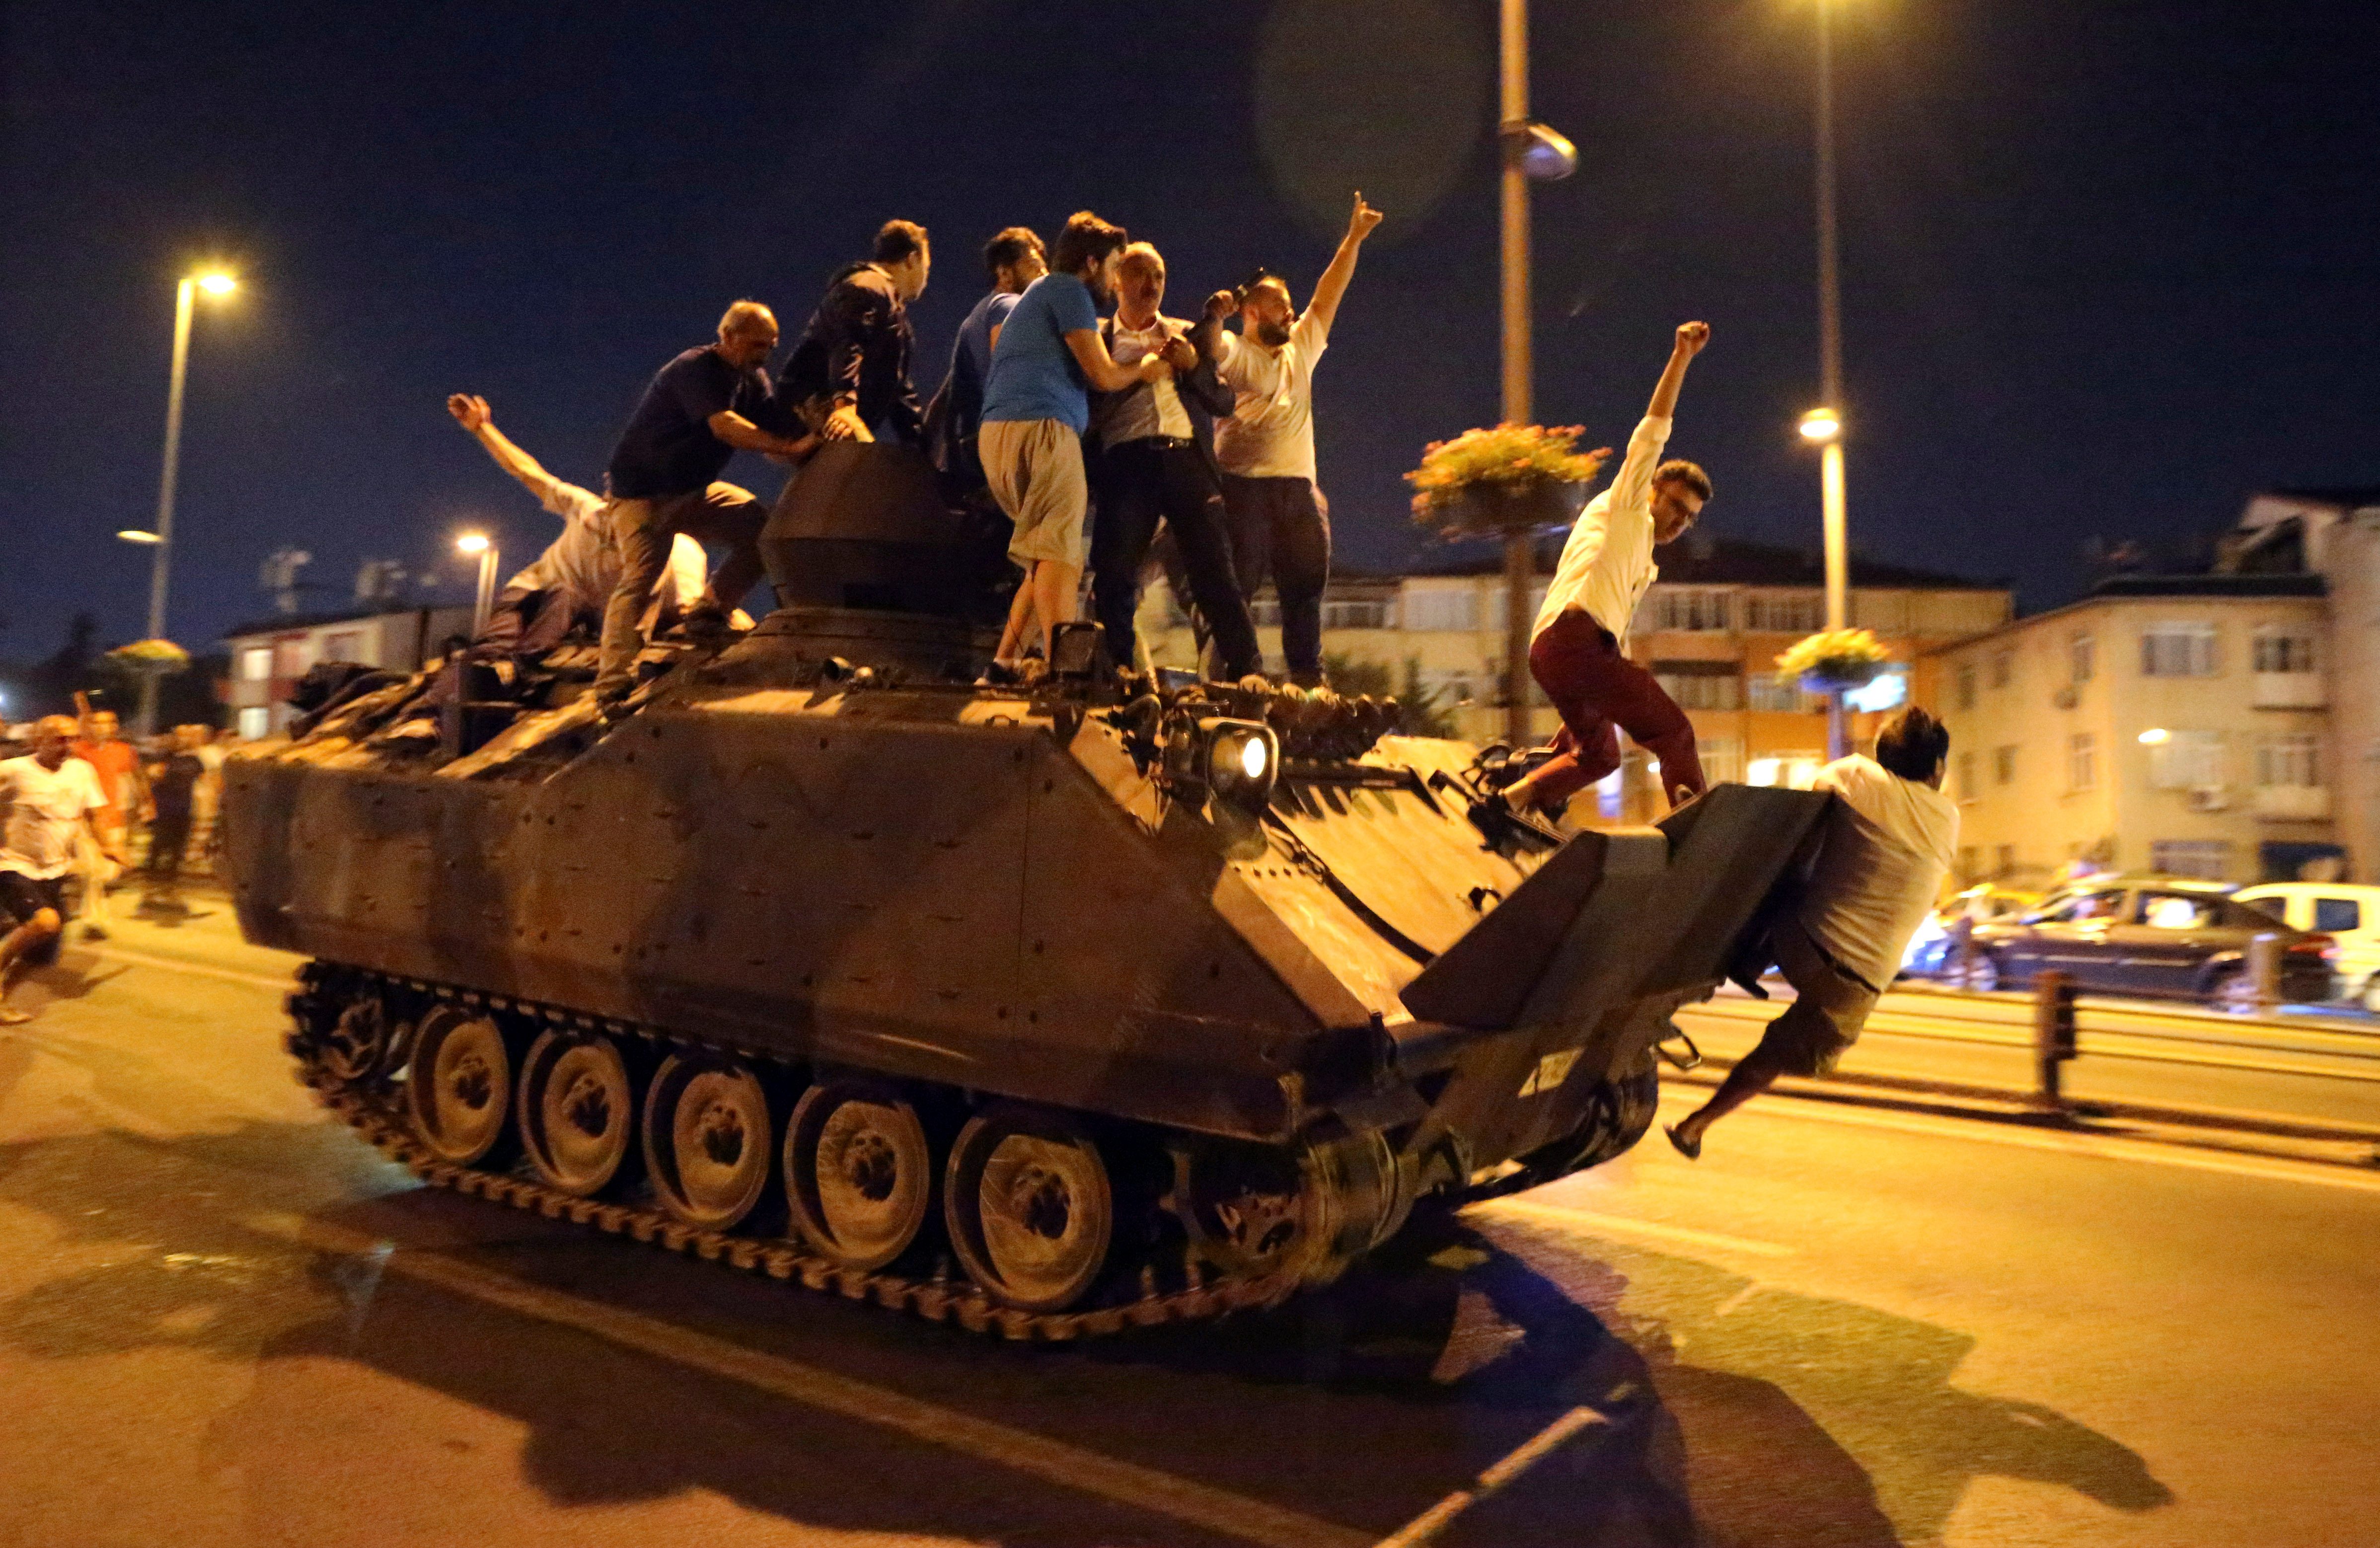 PEOPLE POWER. People occupy a tank in Istanbul on July 2016. Photo by Tolga Bozoglu/EPA  